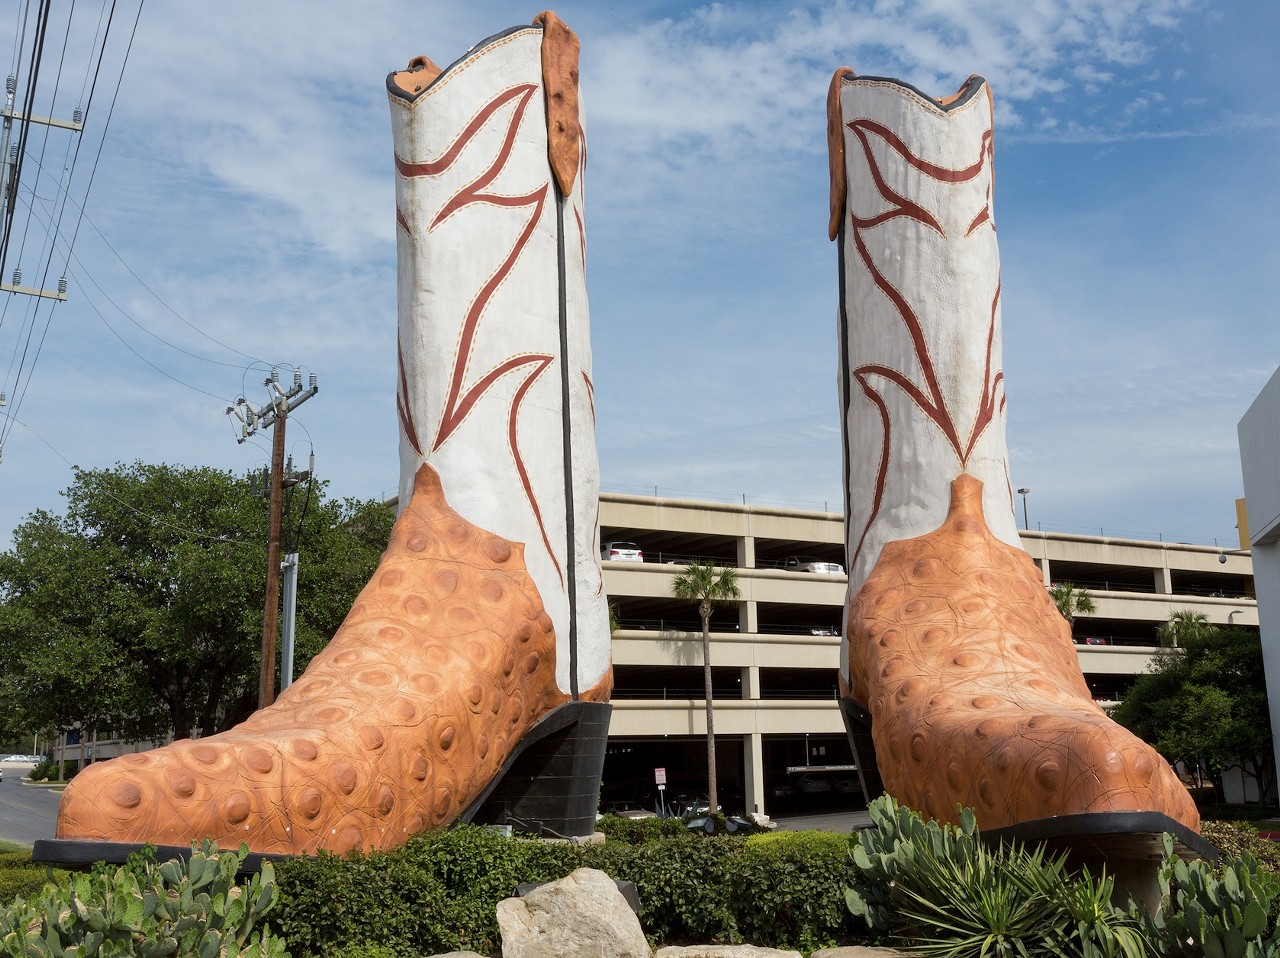 World’s Largest Cowboy Boots
North Star Mall, 7400 San Pedro Ave.
Native San Antonians might not pay any attention to the giant cowboy boots in front of North Star Mall, but there's more to them than you'd think. Made by the larger-than-life artist Bob "Daddy-O" Wade, these boots were installed at North Star in 1979 and officially made it into the Guinness Book of World Records as the World's Largest Cowboy Boots four decades later.